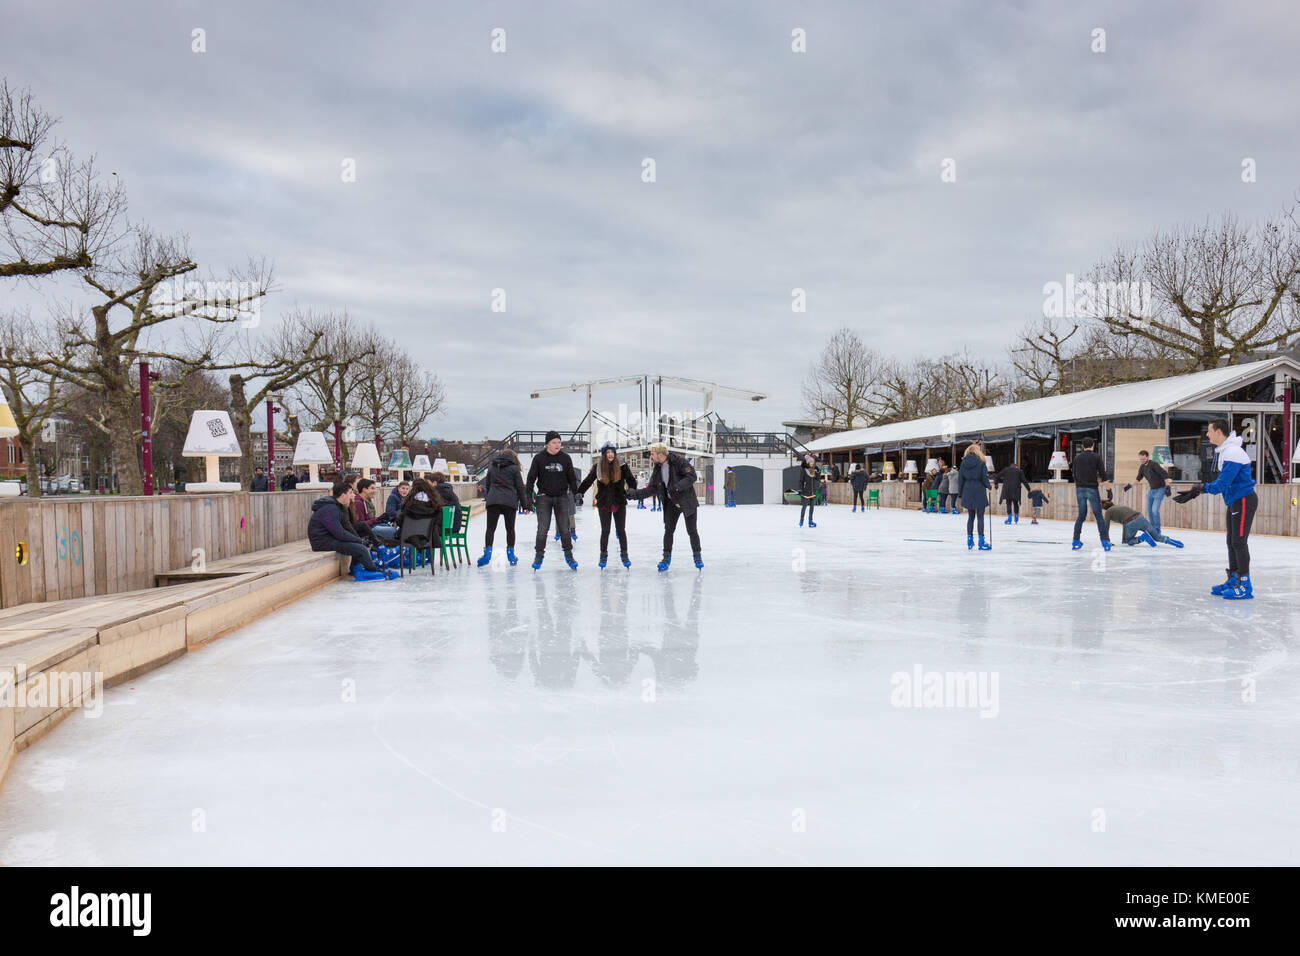 People are skating on the ice rink at the Museumplein in Amsterdam, the Netherlands Stock Photo